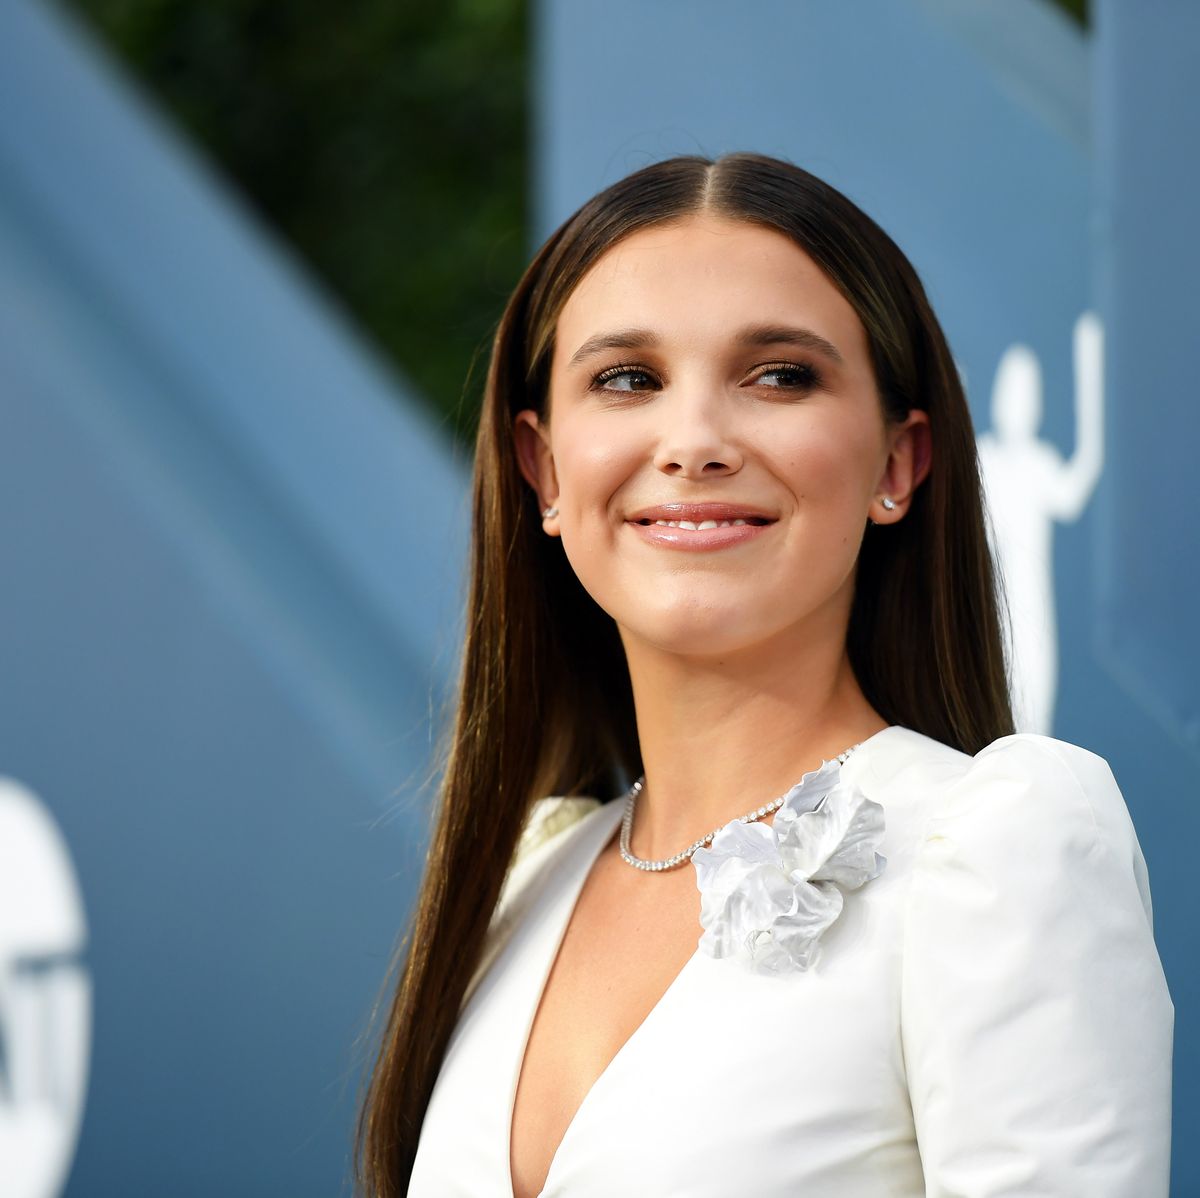 Millie Bobby Brown Just Wore The Cutest Bustier Top, 46% OFF